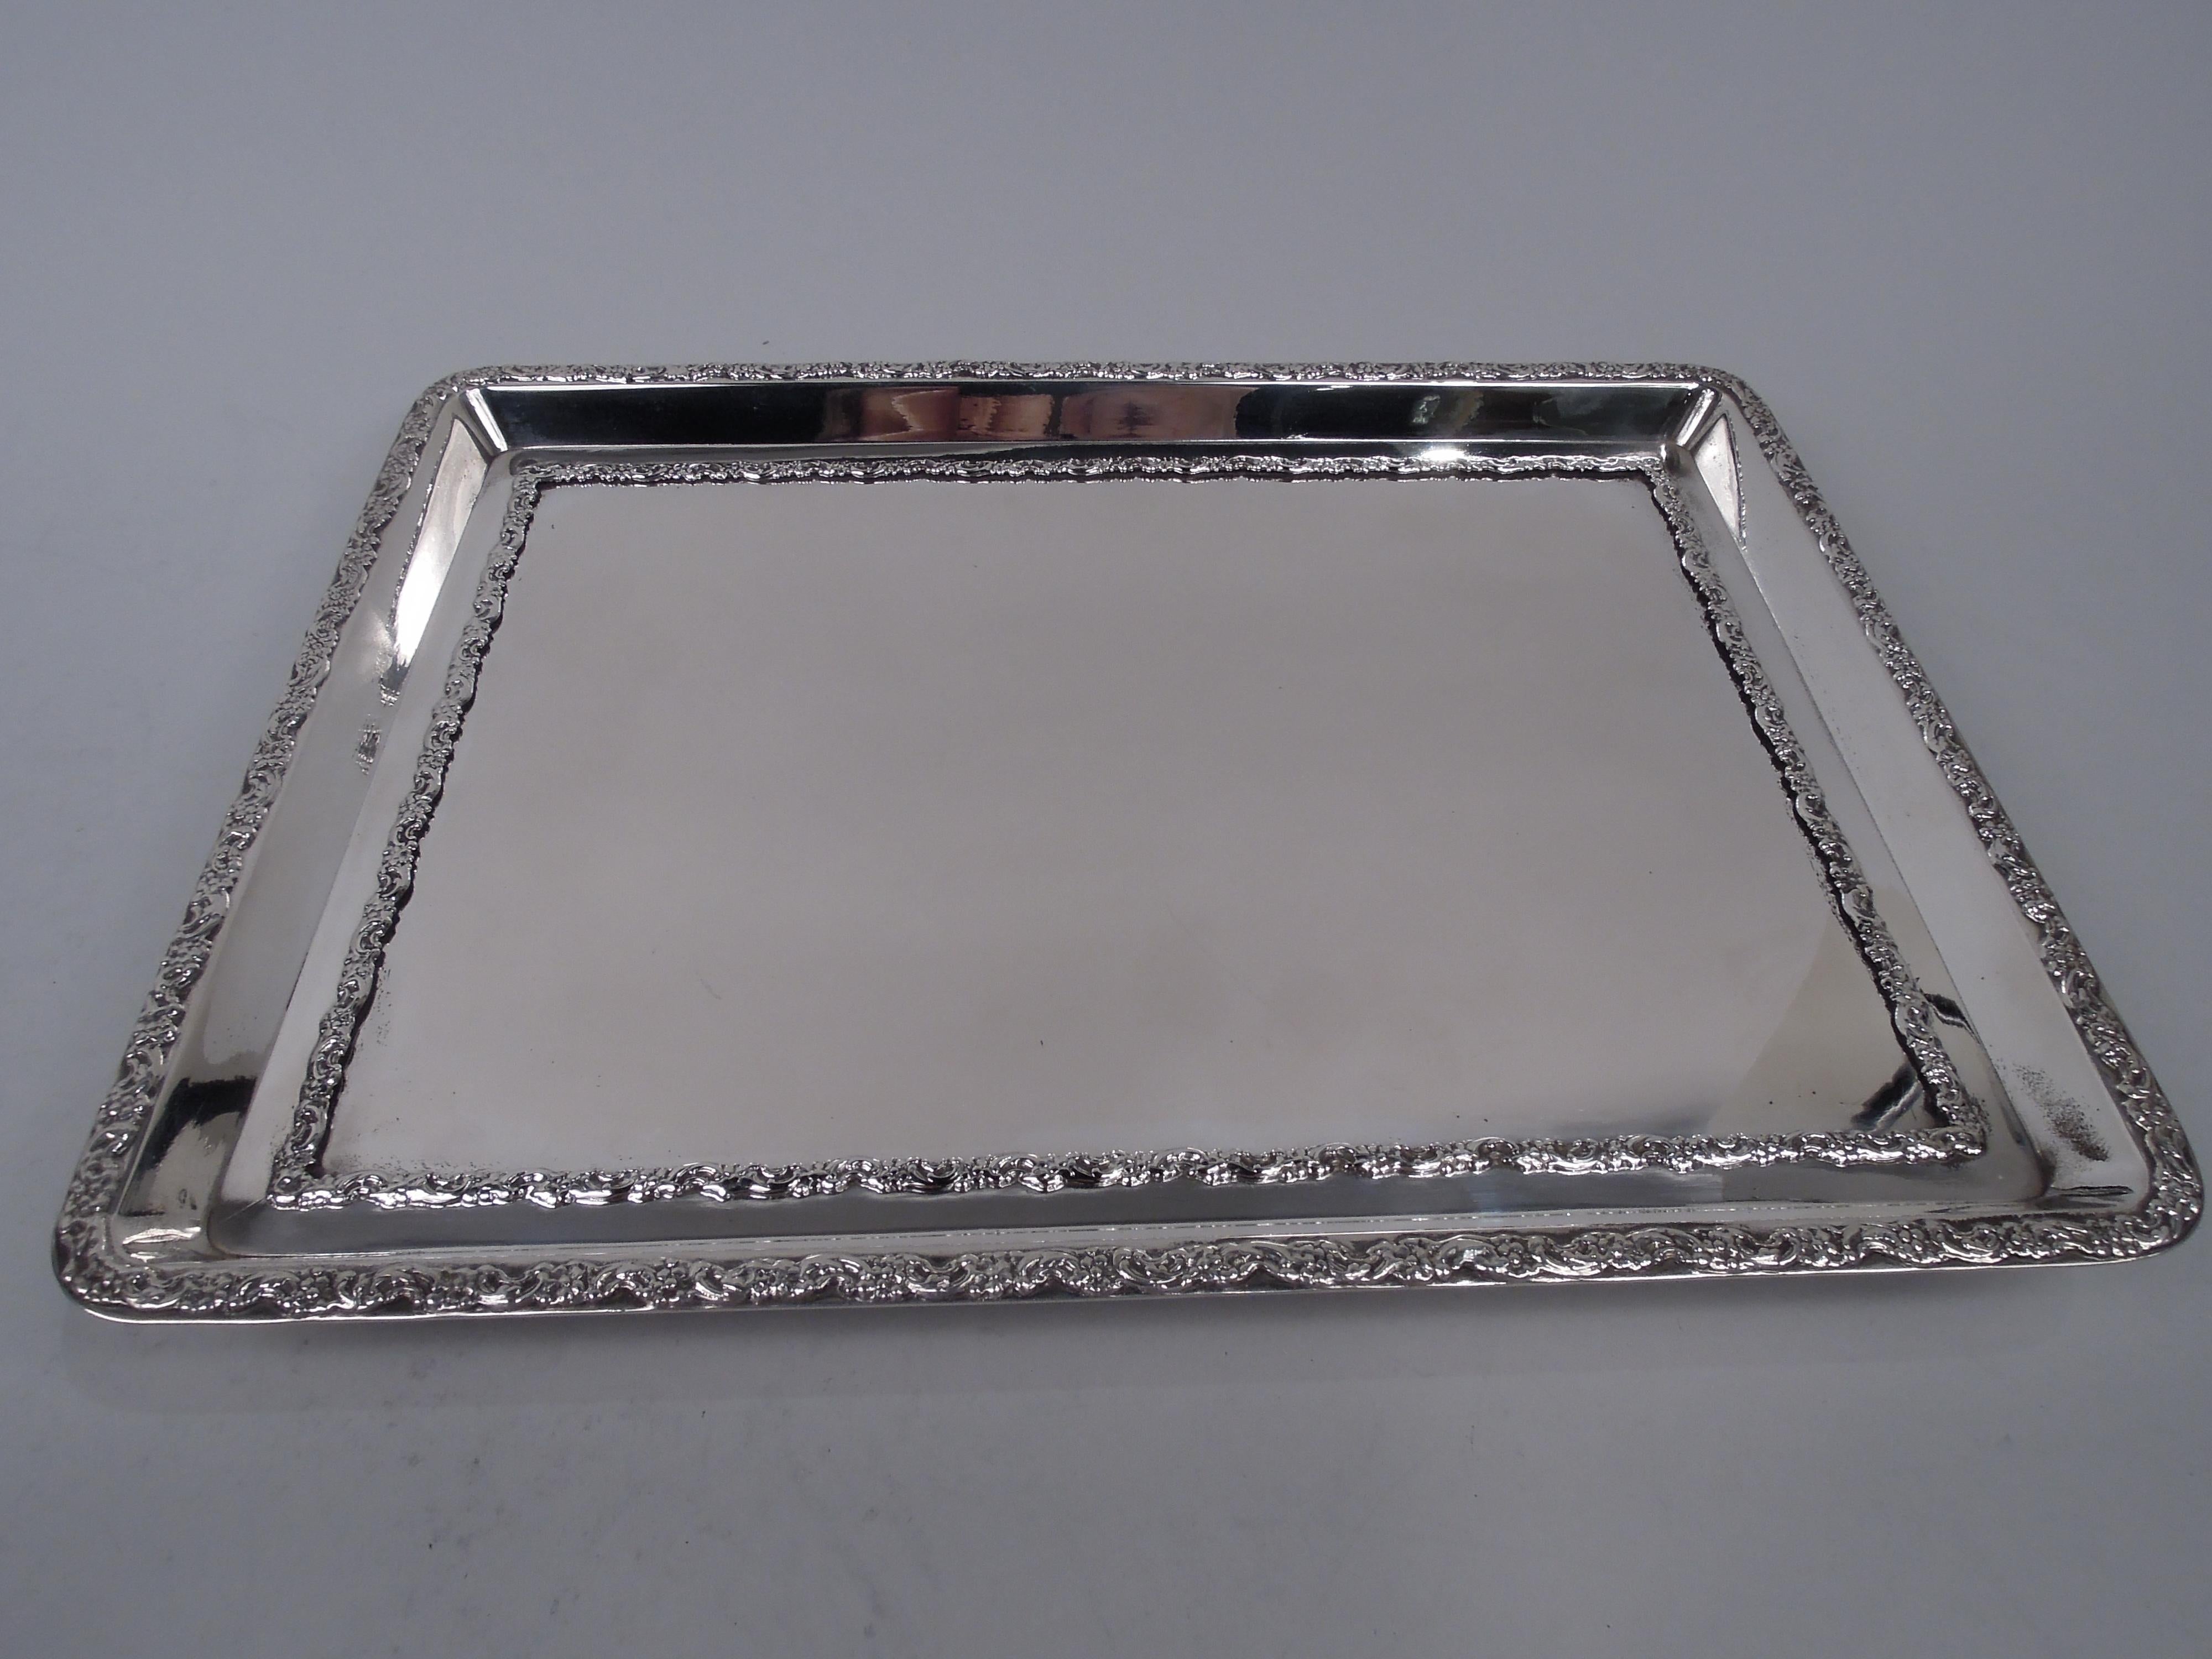 English Edwardian Classical sterling silver tray, 1908. Rectangular with tapering sides and everted rim. Scroll and flower border applied to well and rim. Corner ball supports. Fully marked including London assay stamp and stamp for New Bond Street